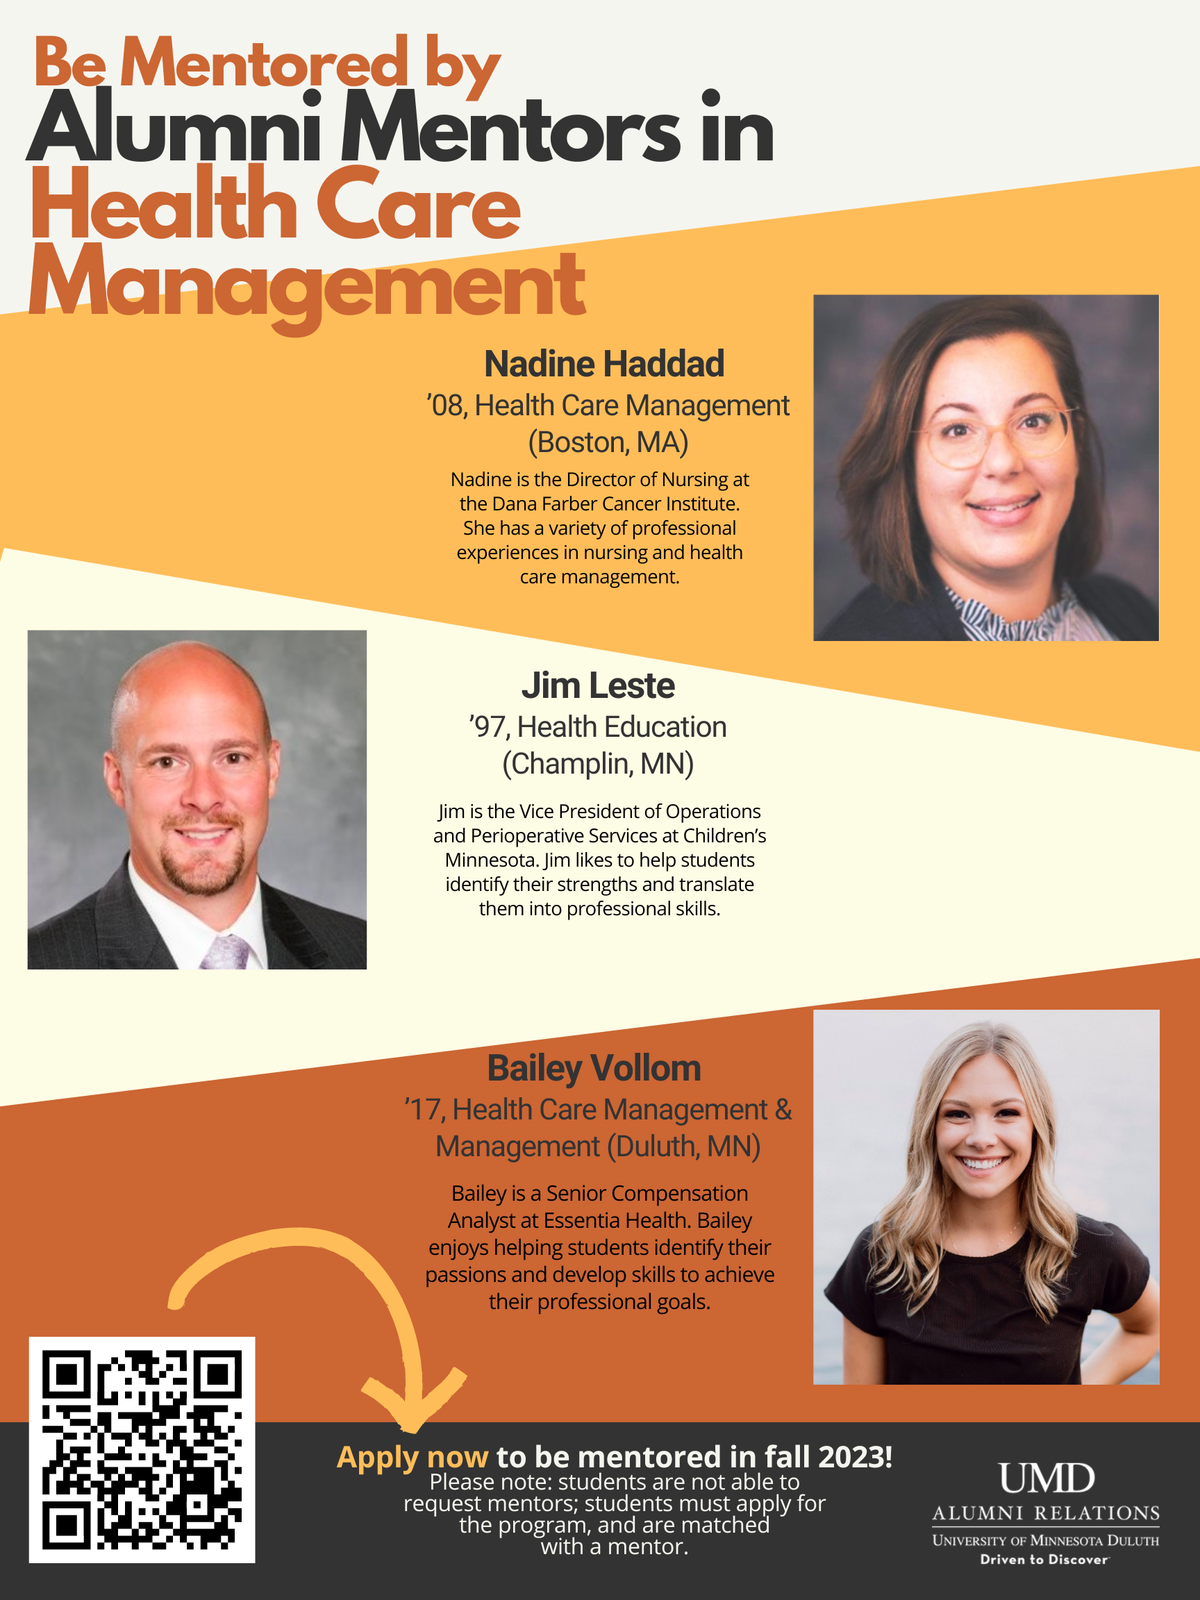 poster with images of three mentors in health care management